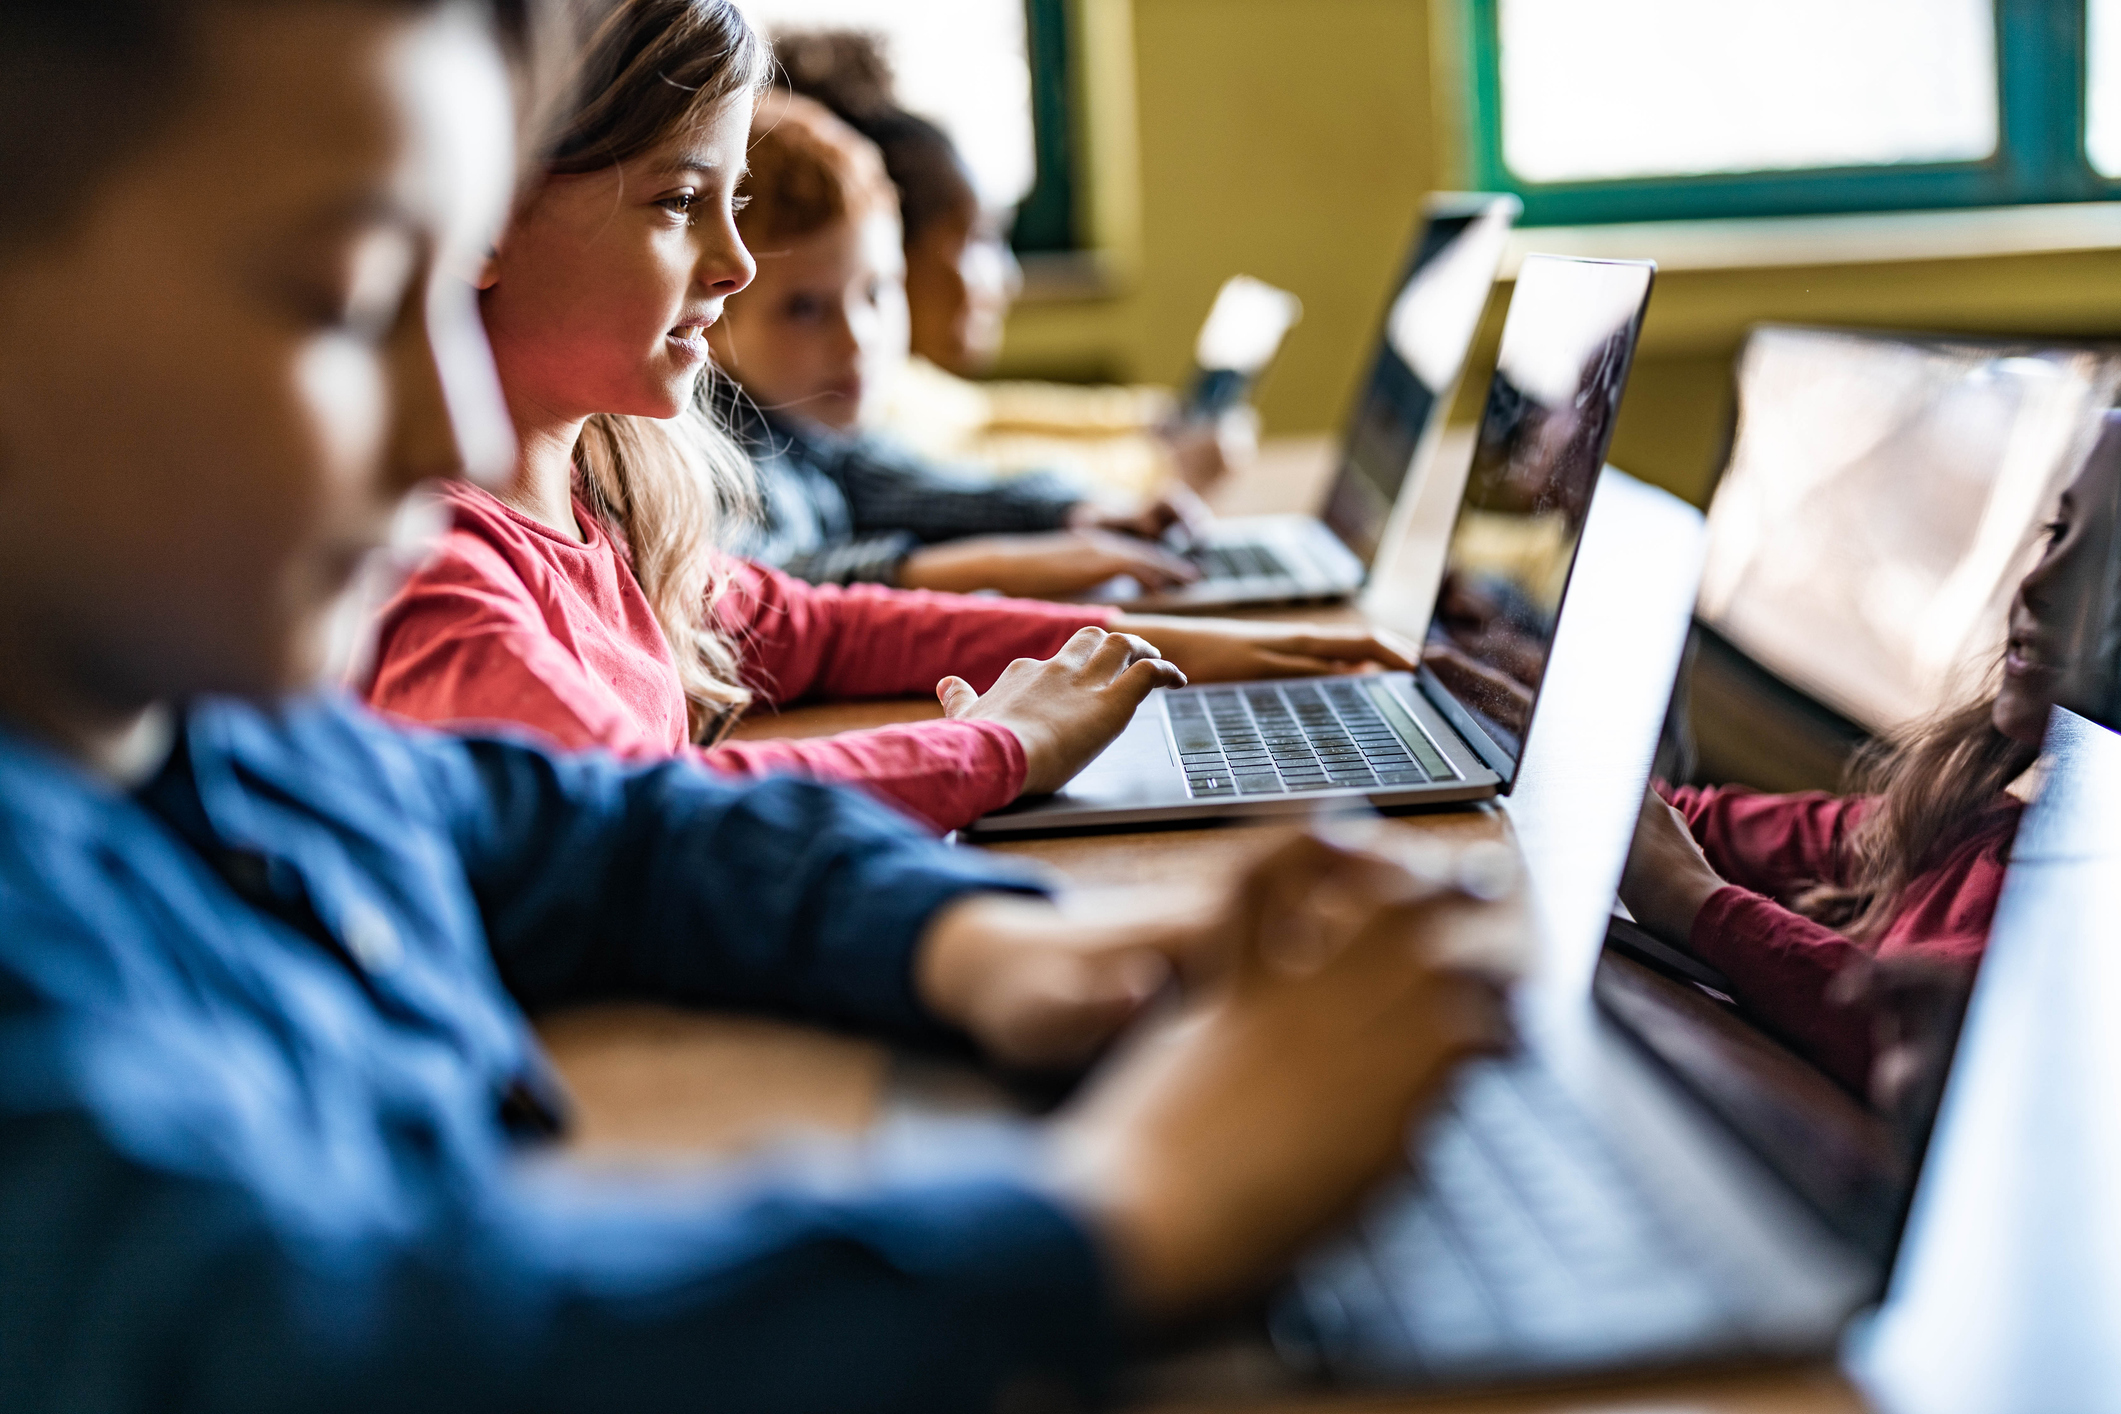 6 Best Practices for K-12 Cybersecurity to Protect Schools